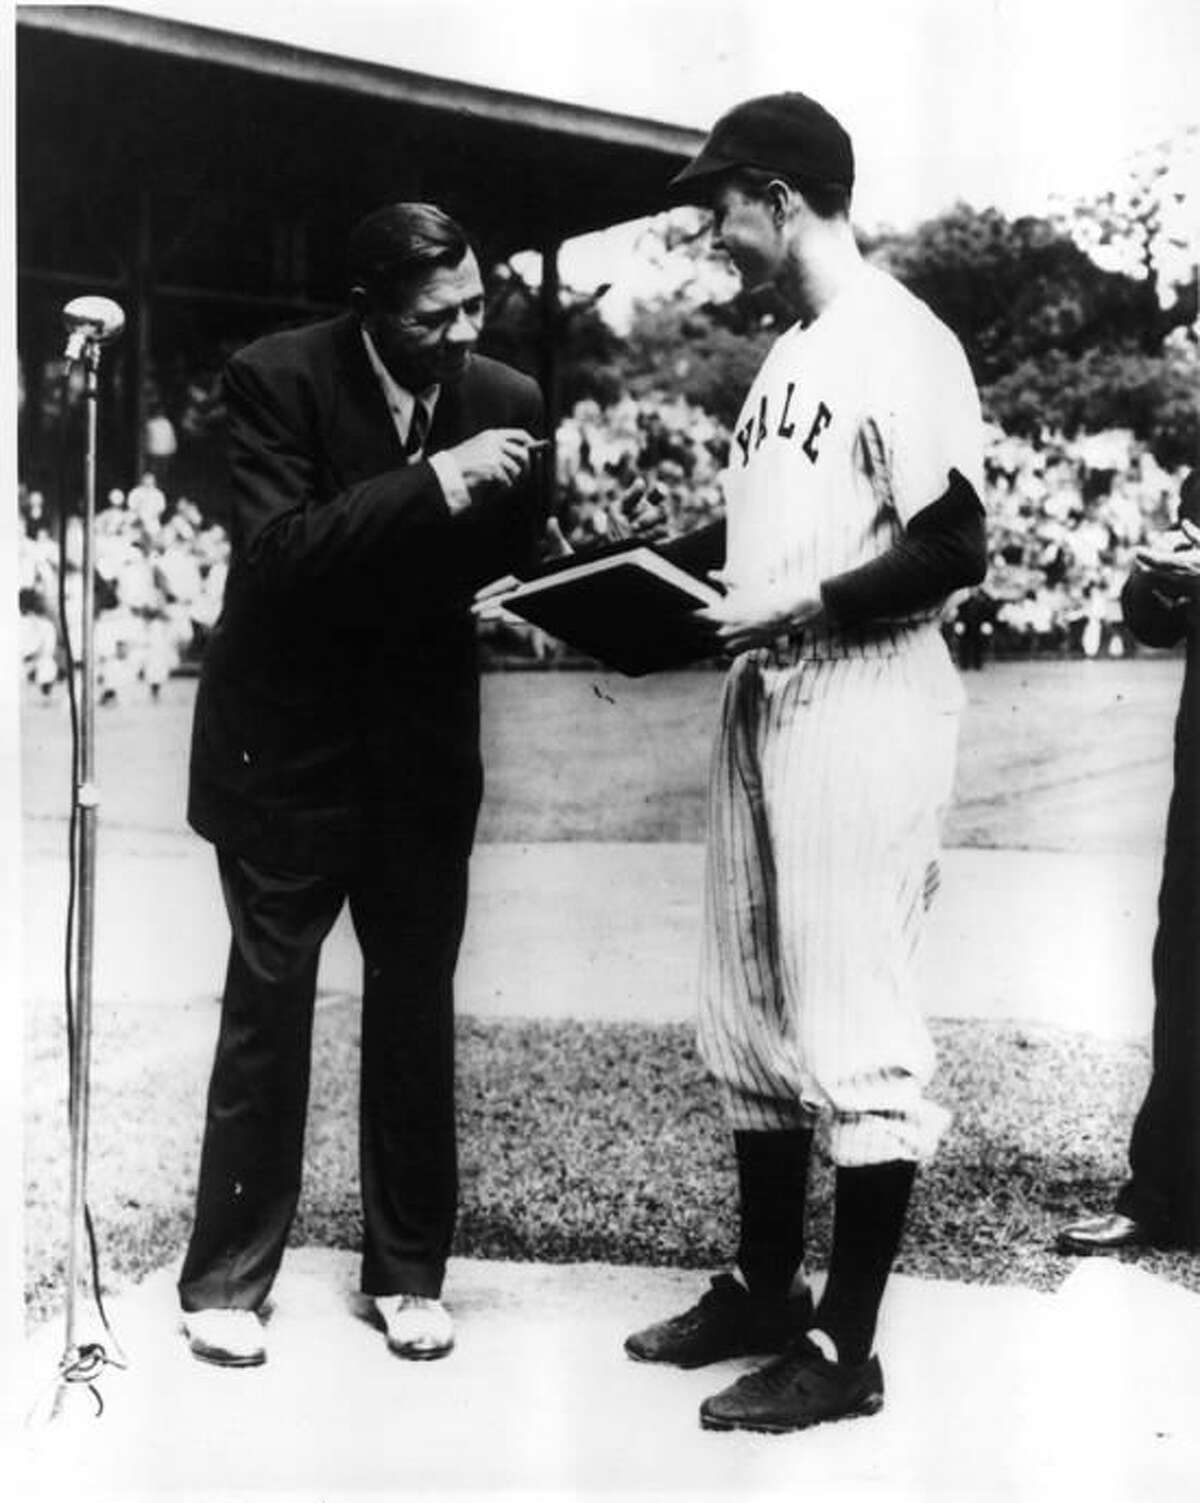 Yale Field was the site on that day in 1948 when Babe Ruth met future President and Yale captain at the time George H.W. Bush. (Photo courtesy of Yale Athletics)